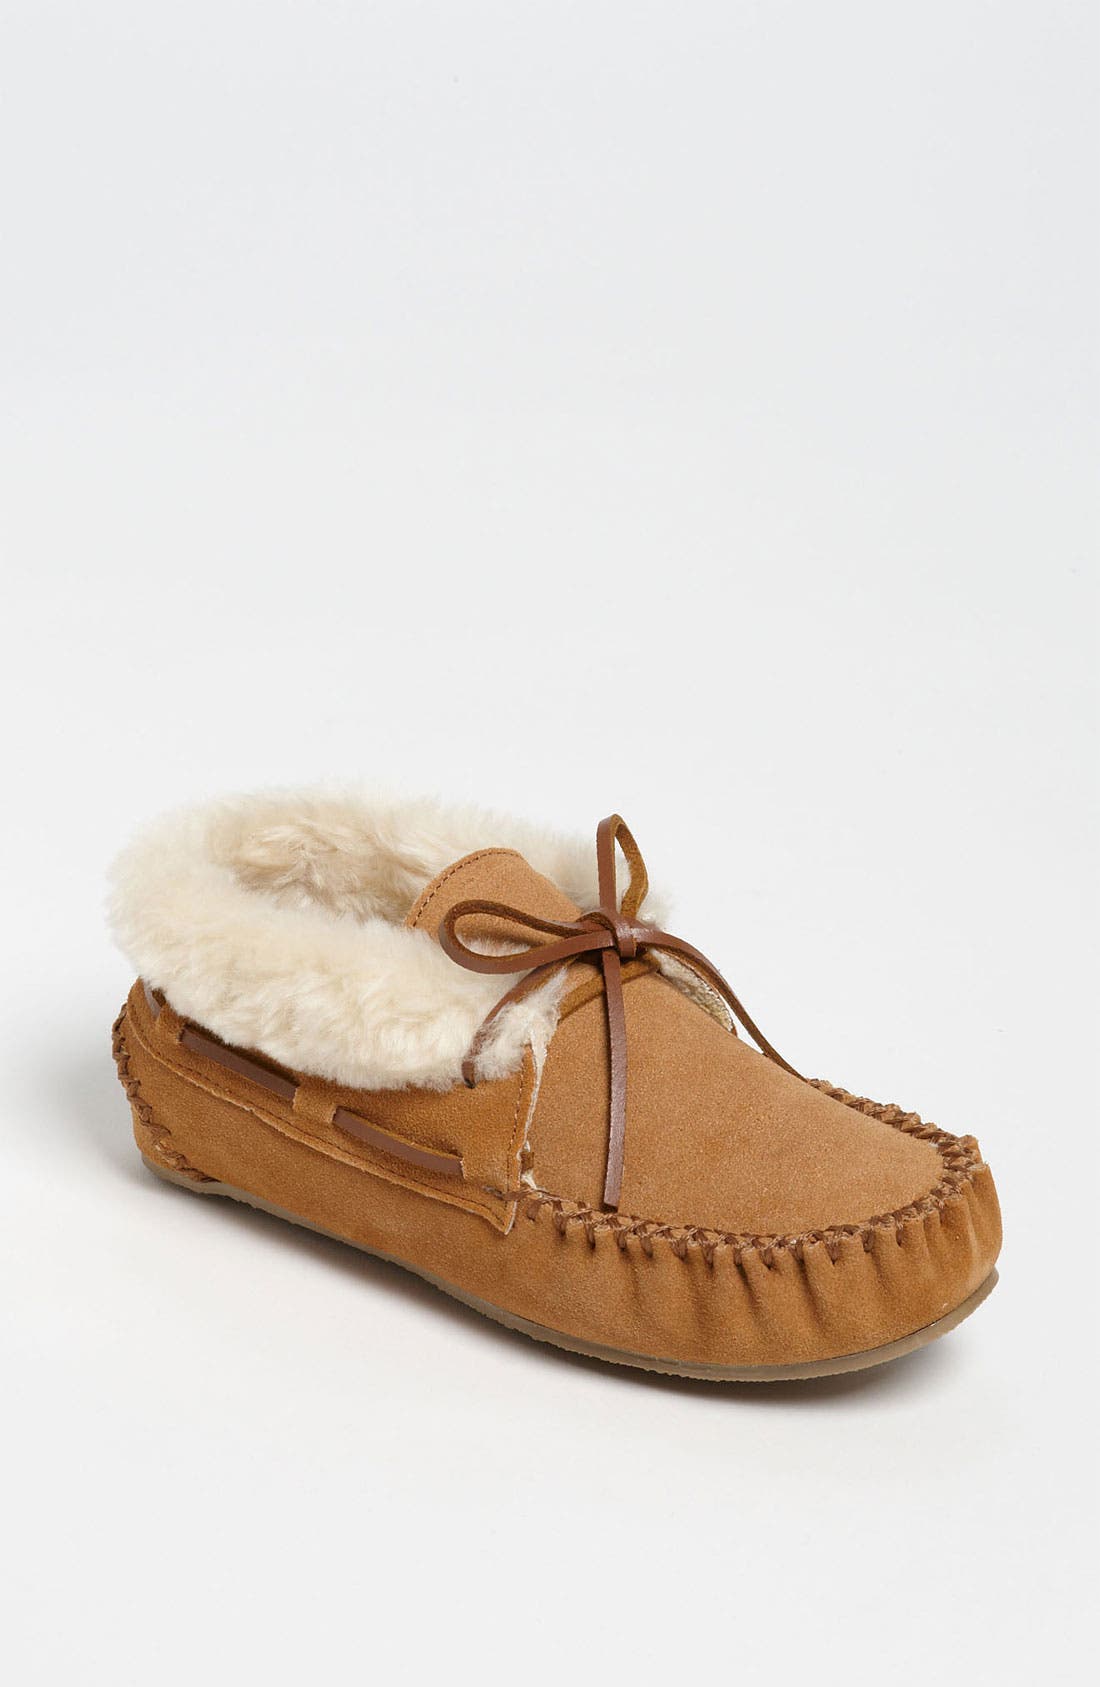 Moccasin Booties \u0026 Ankle Boots | Nordstrom